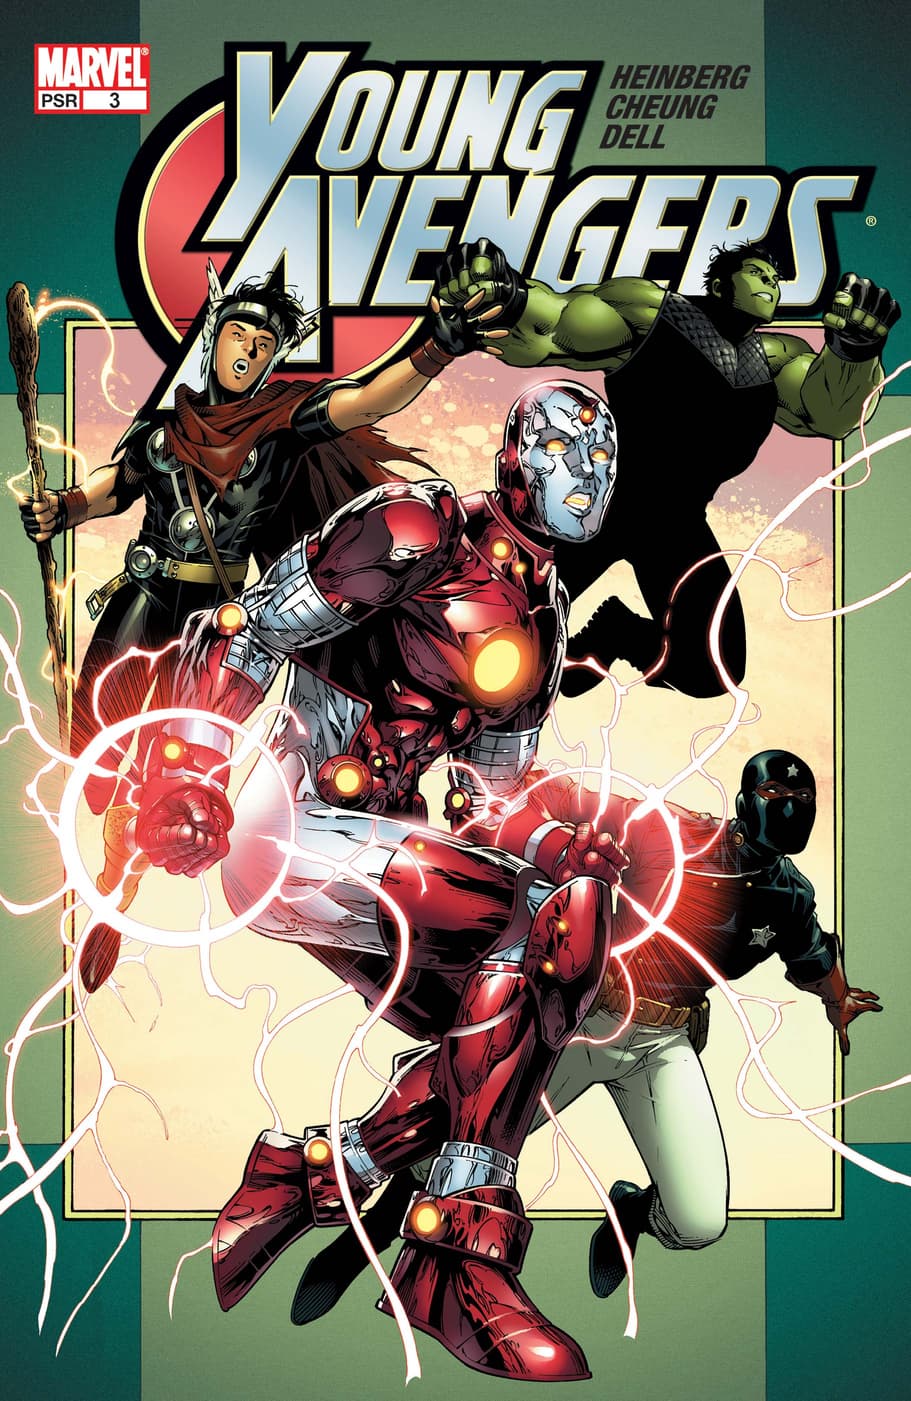 YOUNG AVENGERS (2005) #3 Iron Lad